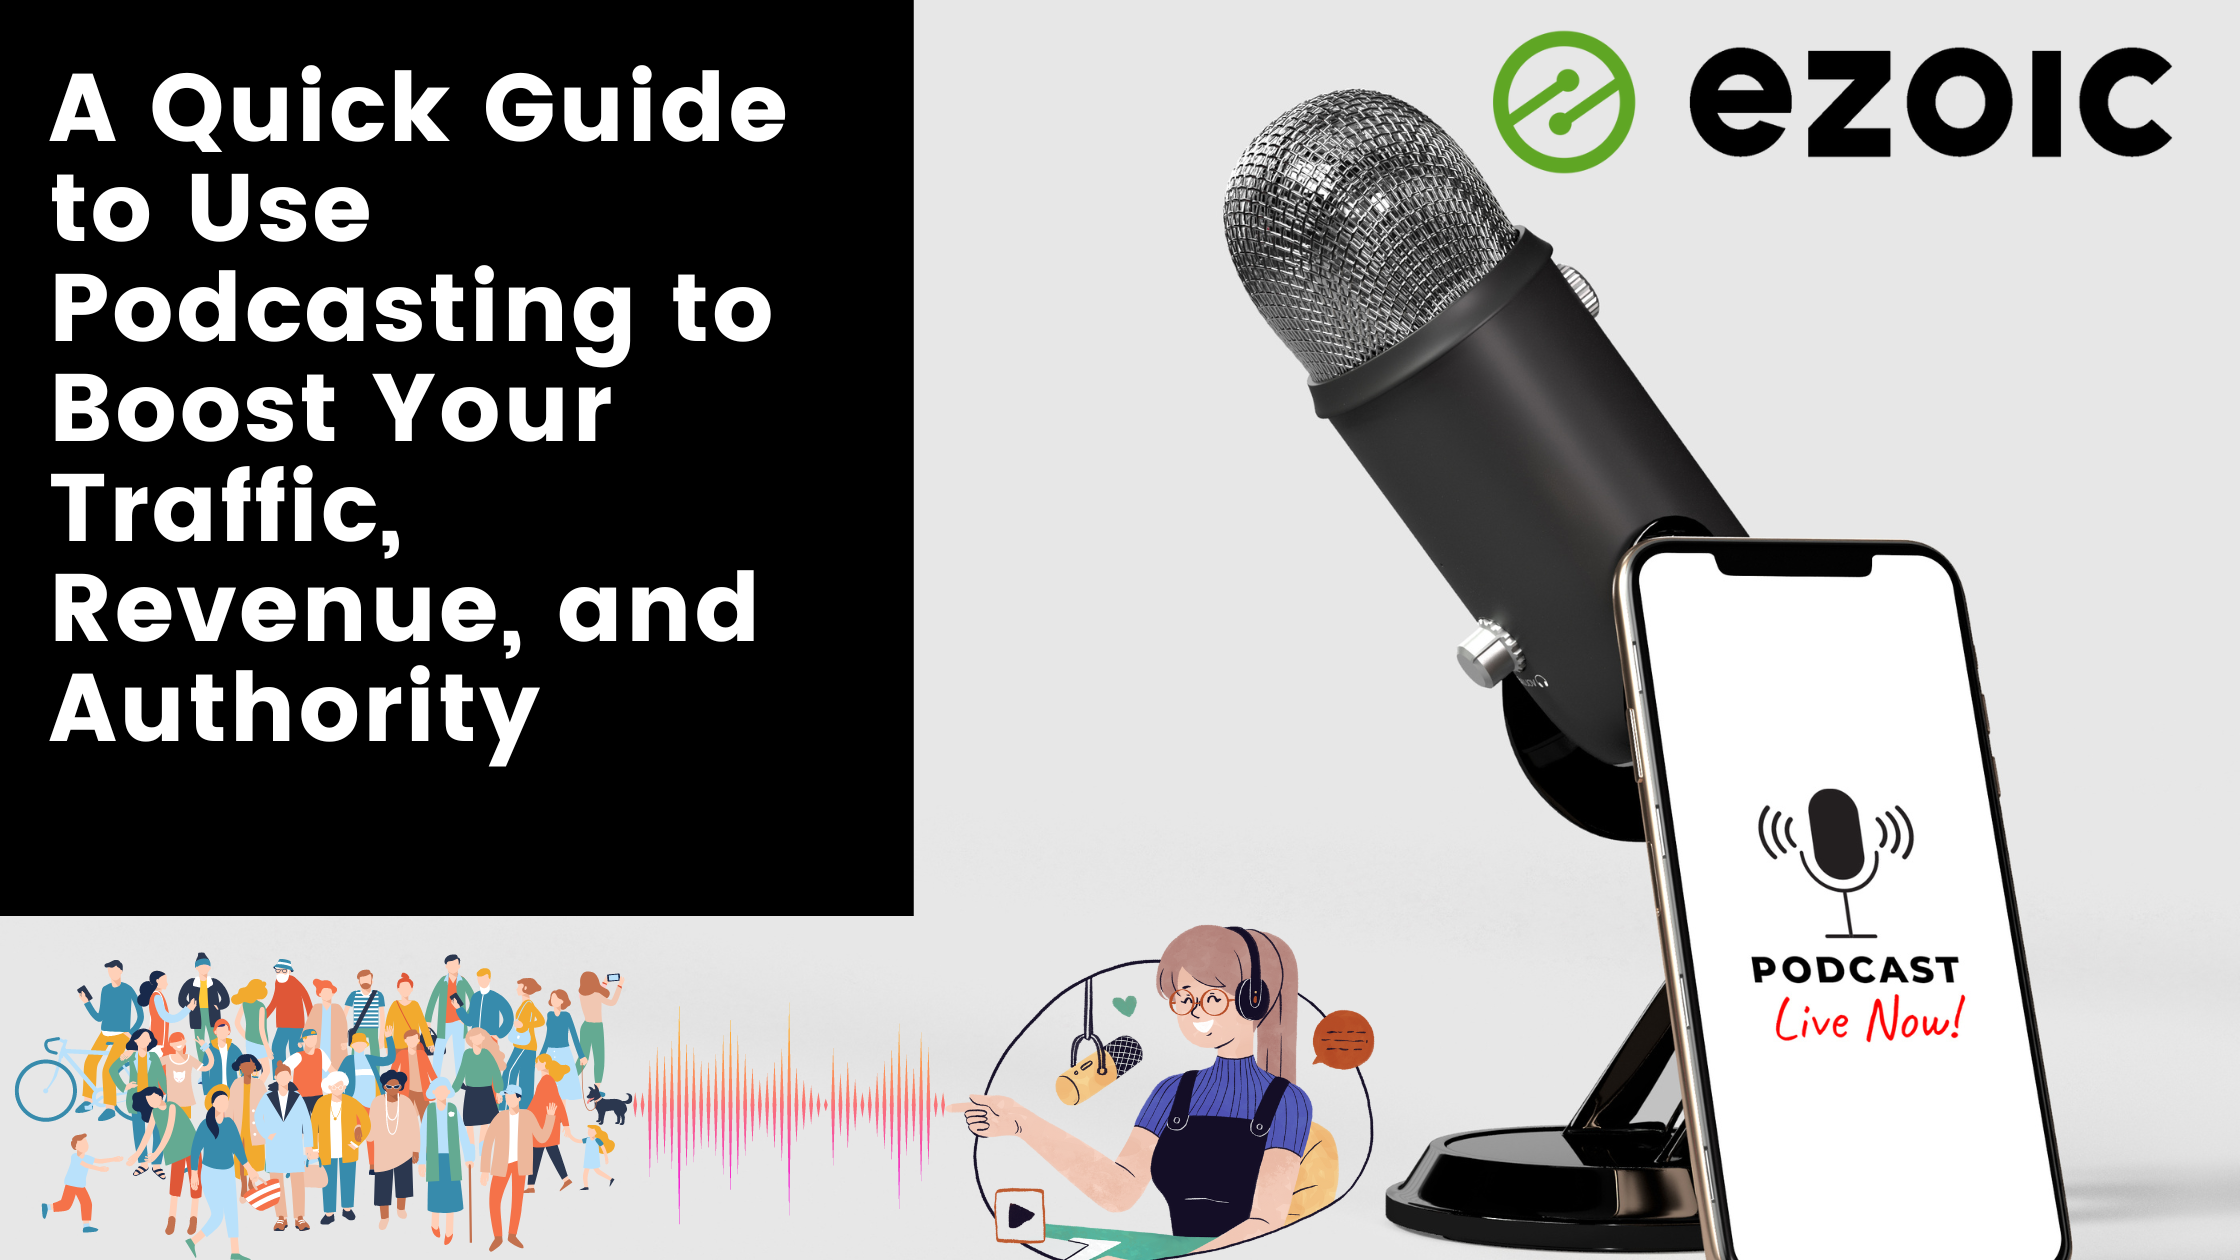 A Quick Guide to Use Podcasting to Boost Your Traffic, Revenue, and Authority